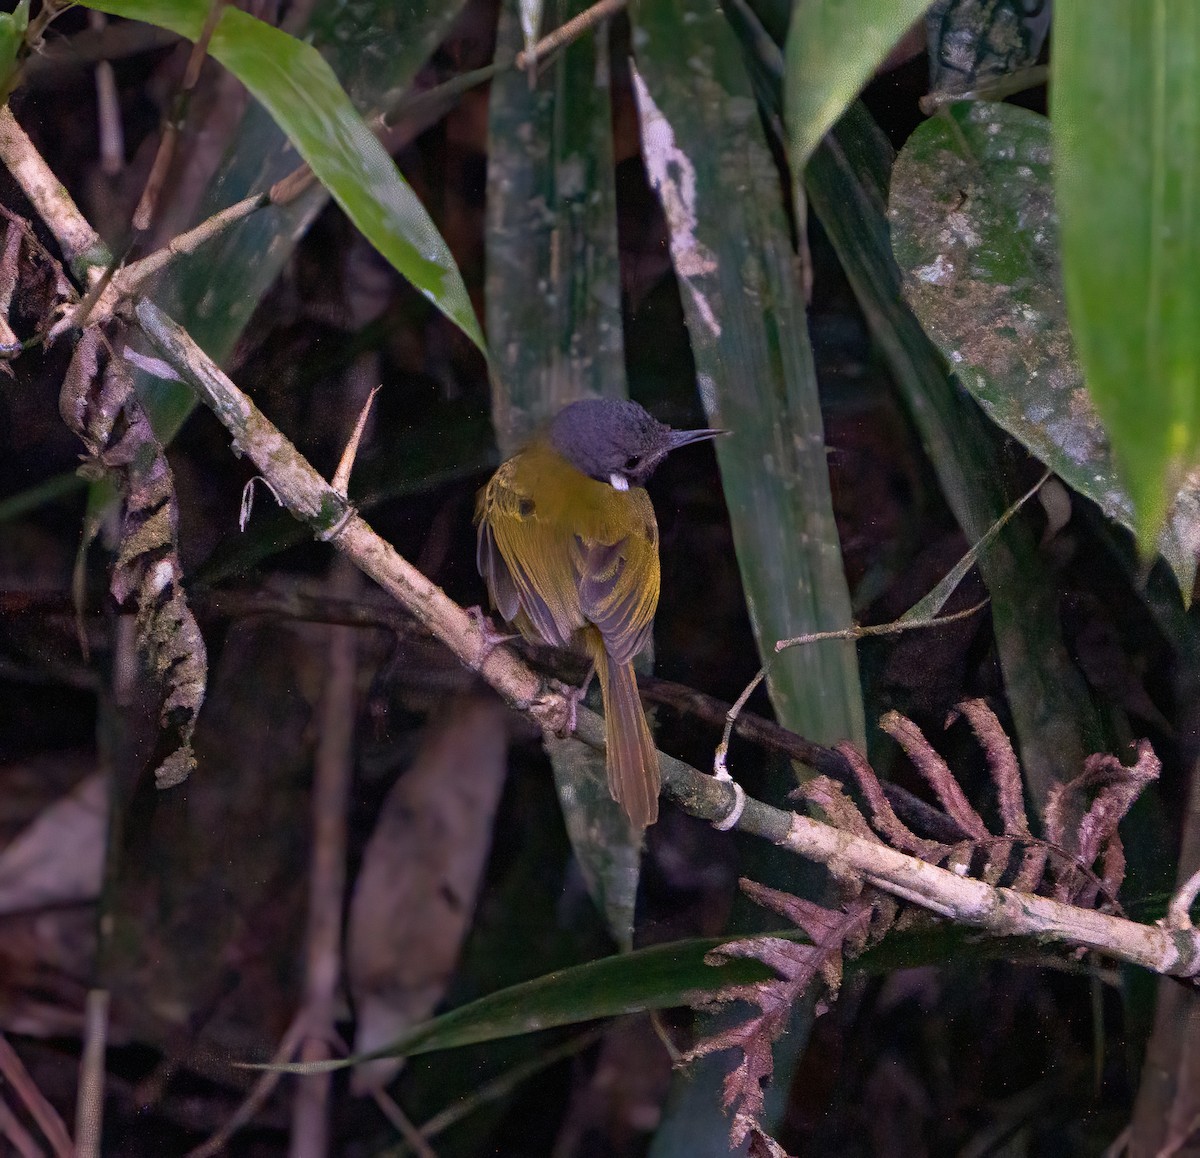 White-eared Tailorbird - Kevin Pearce